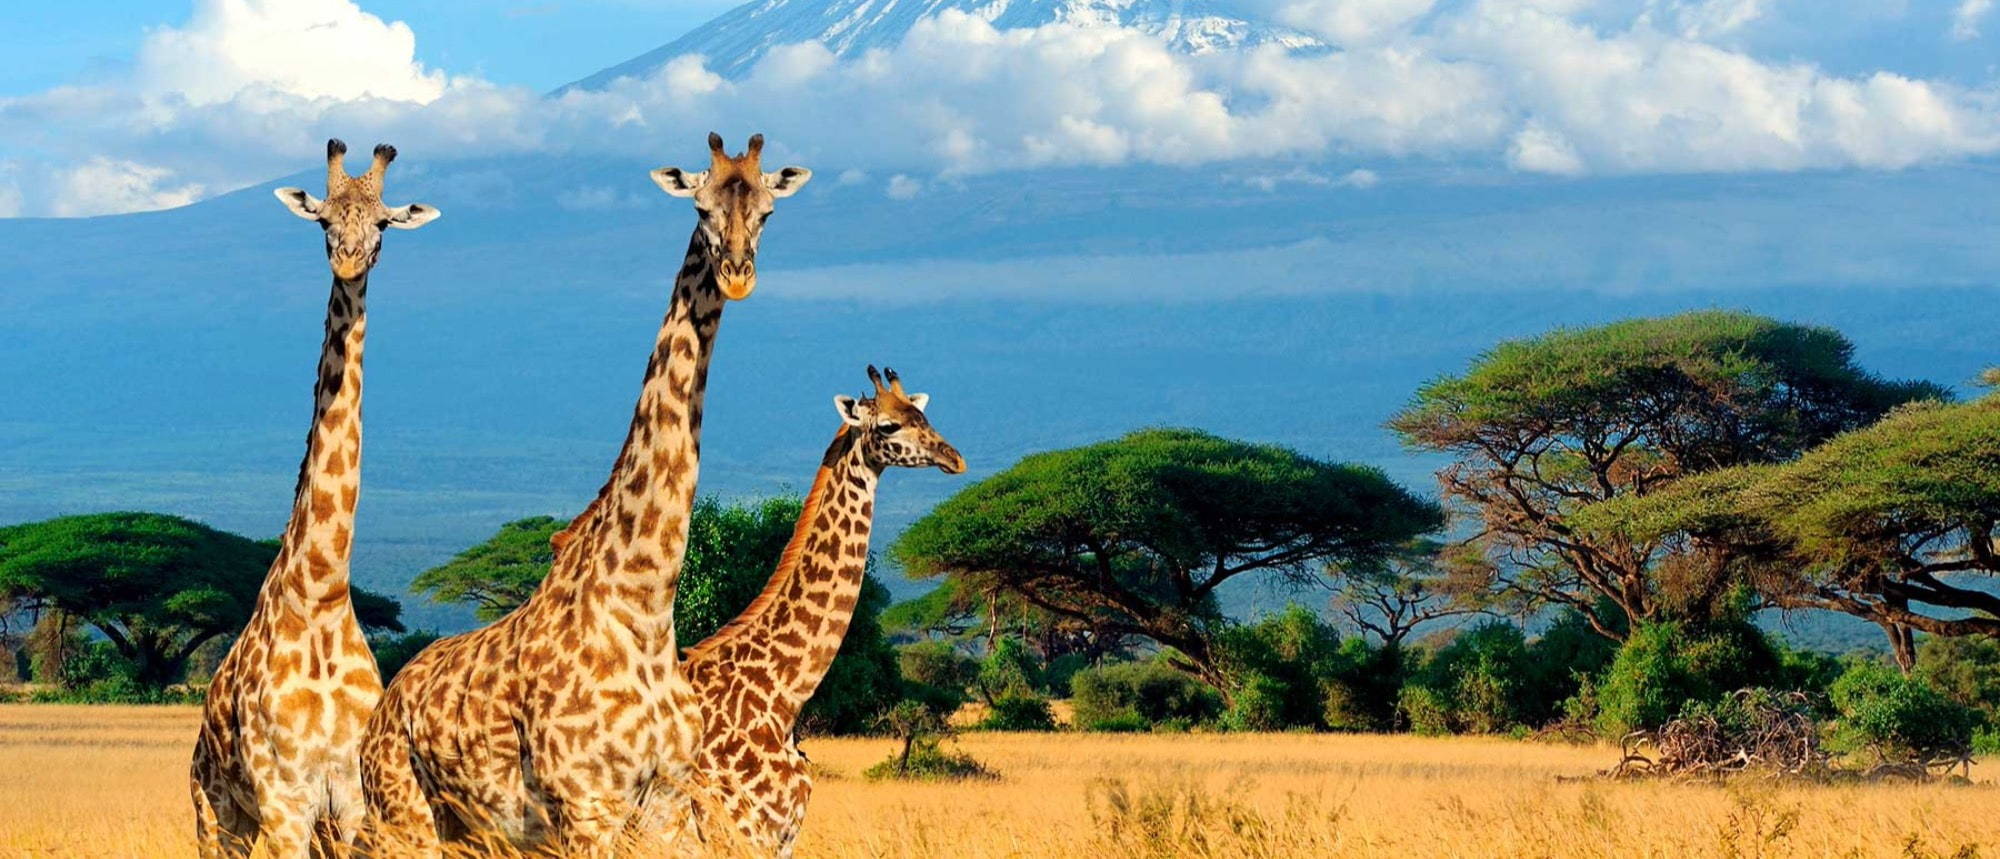 Africa Jobs | Rishworth Aviation | Giraffes grazing with trees and mountains in background